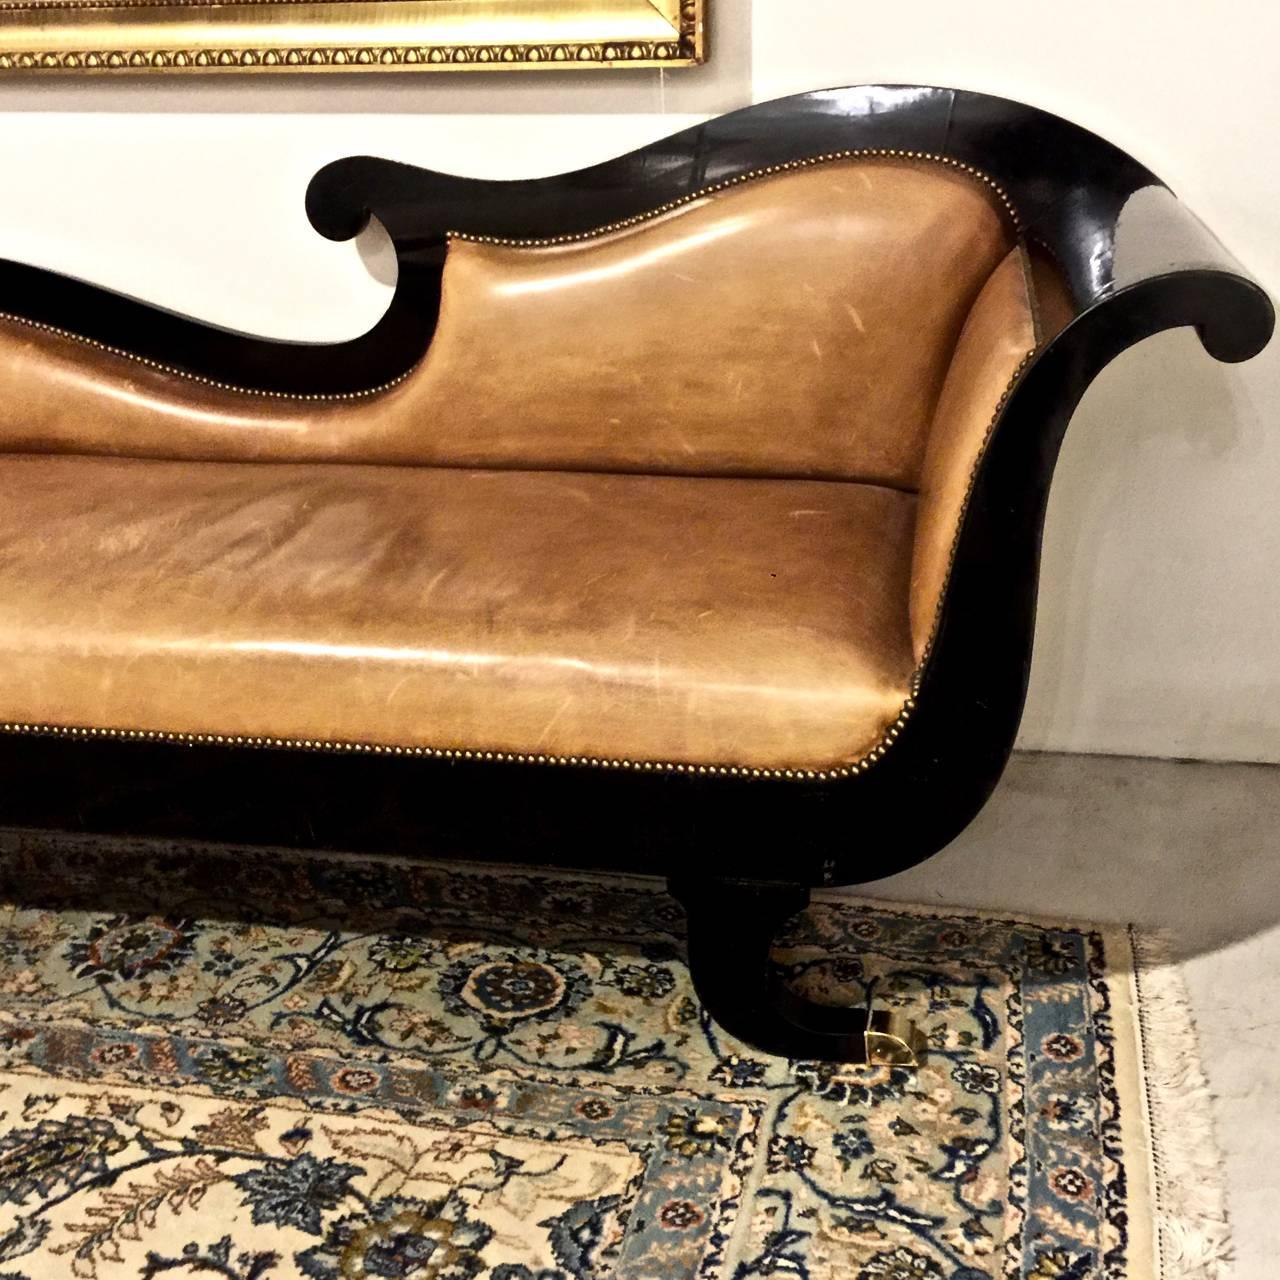 This is a highly decorative English Regency lacquered sofa that dates to circa 1825.
The sofa is upholstered in top quality pale caramel-toned leather that has acquired just the right amount of patina. The back silhouette is very graphic making the